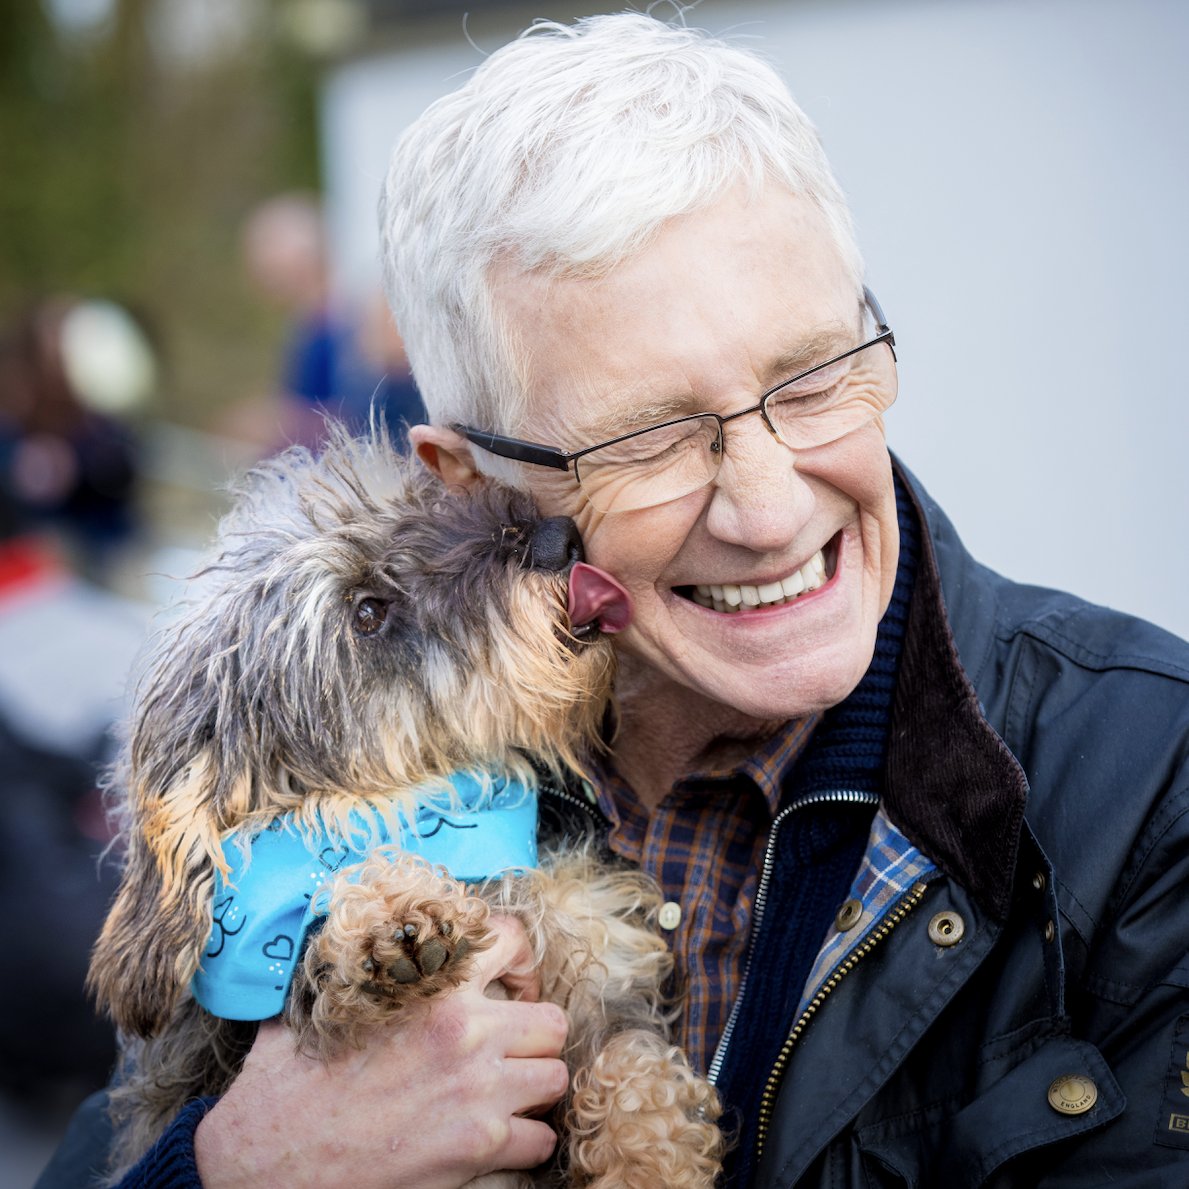 We’re deeply saddened to learn that our wonderful, kind friend and beloved Ambassador Paul O’Grady MBE has passed away. He will be so dearly missed by all of us at Battersea. Our love and thoughts go out to all of Paul's family and friends at this difficult time.